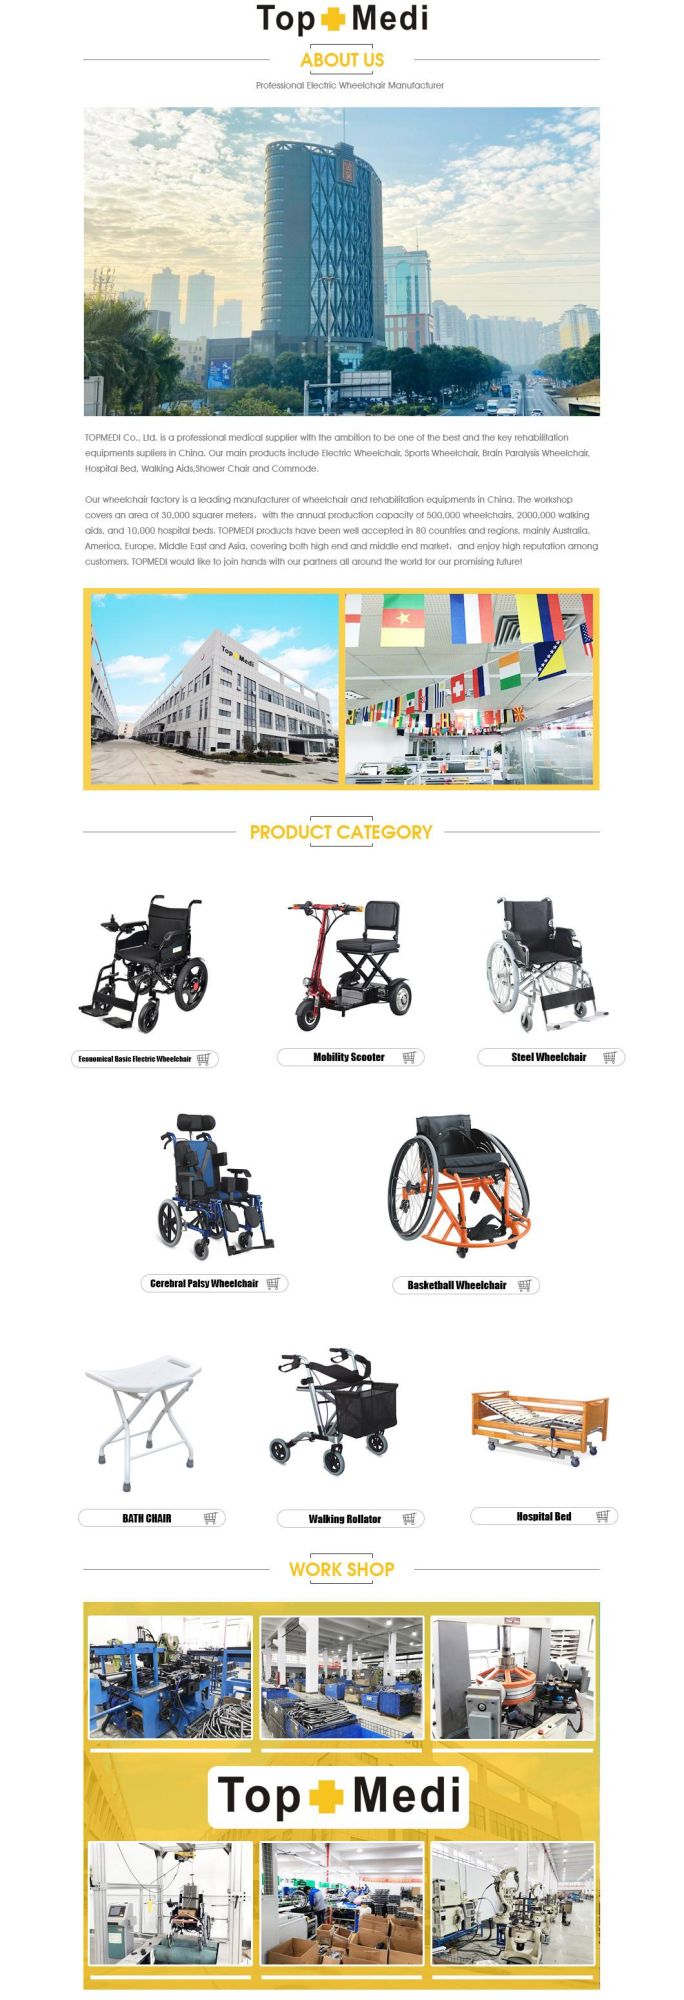 Travel Small Size Portable Lightweight Wheelchair with Aluminum Frame